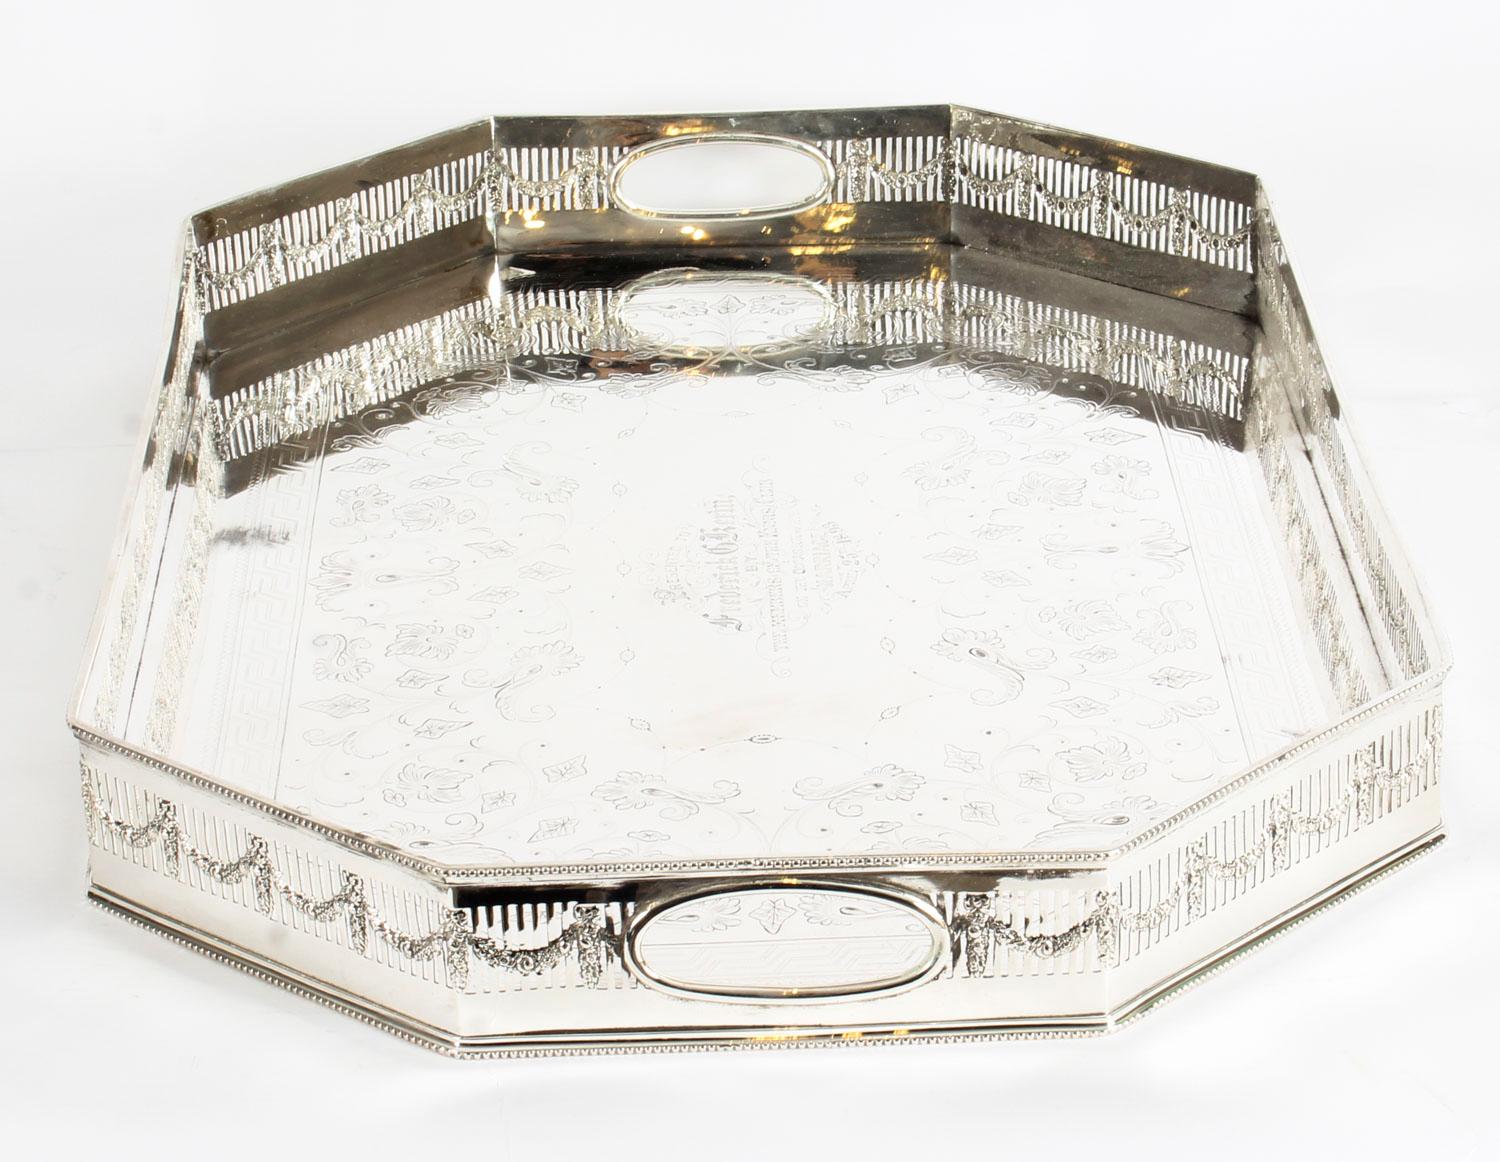 This is a lovely antique Victorian silver plated gallery tray with beautiful engraved decoration bearing the makers mark G & S for the Goldsmiths & Silversmiths Company, London and circa 1880 in date.

This rectangular silver plated tray features